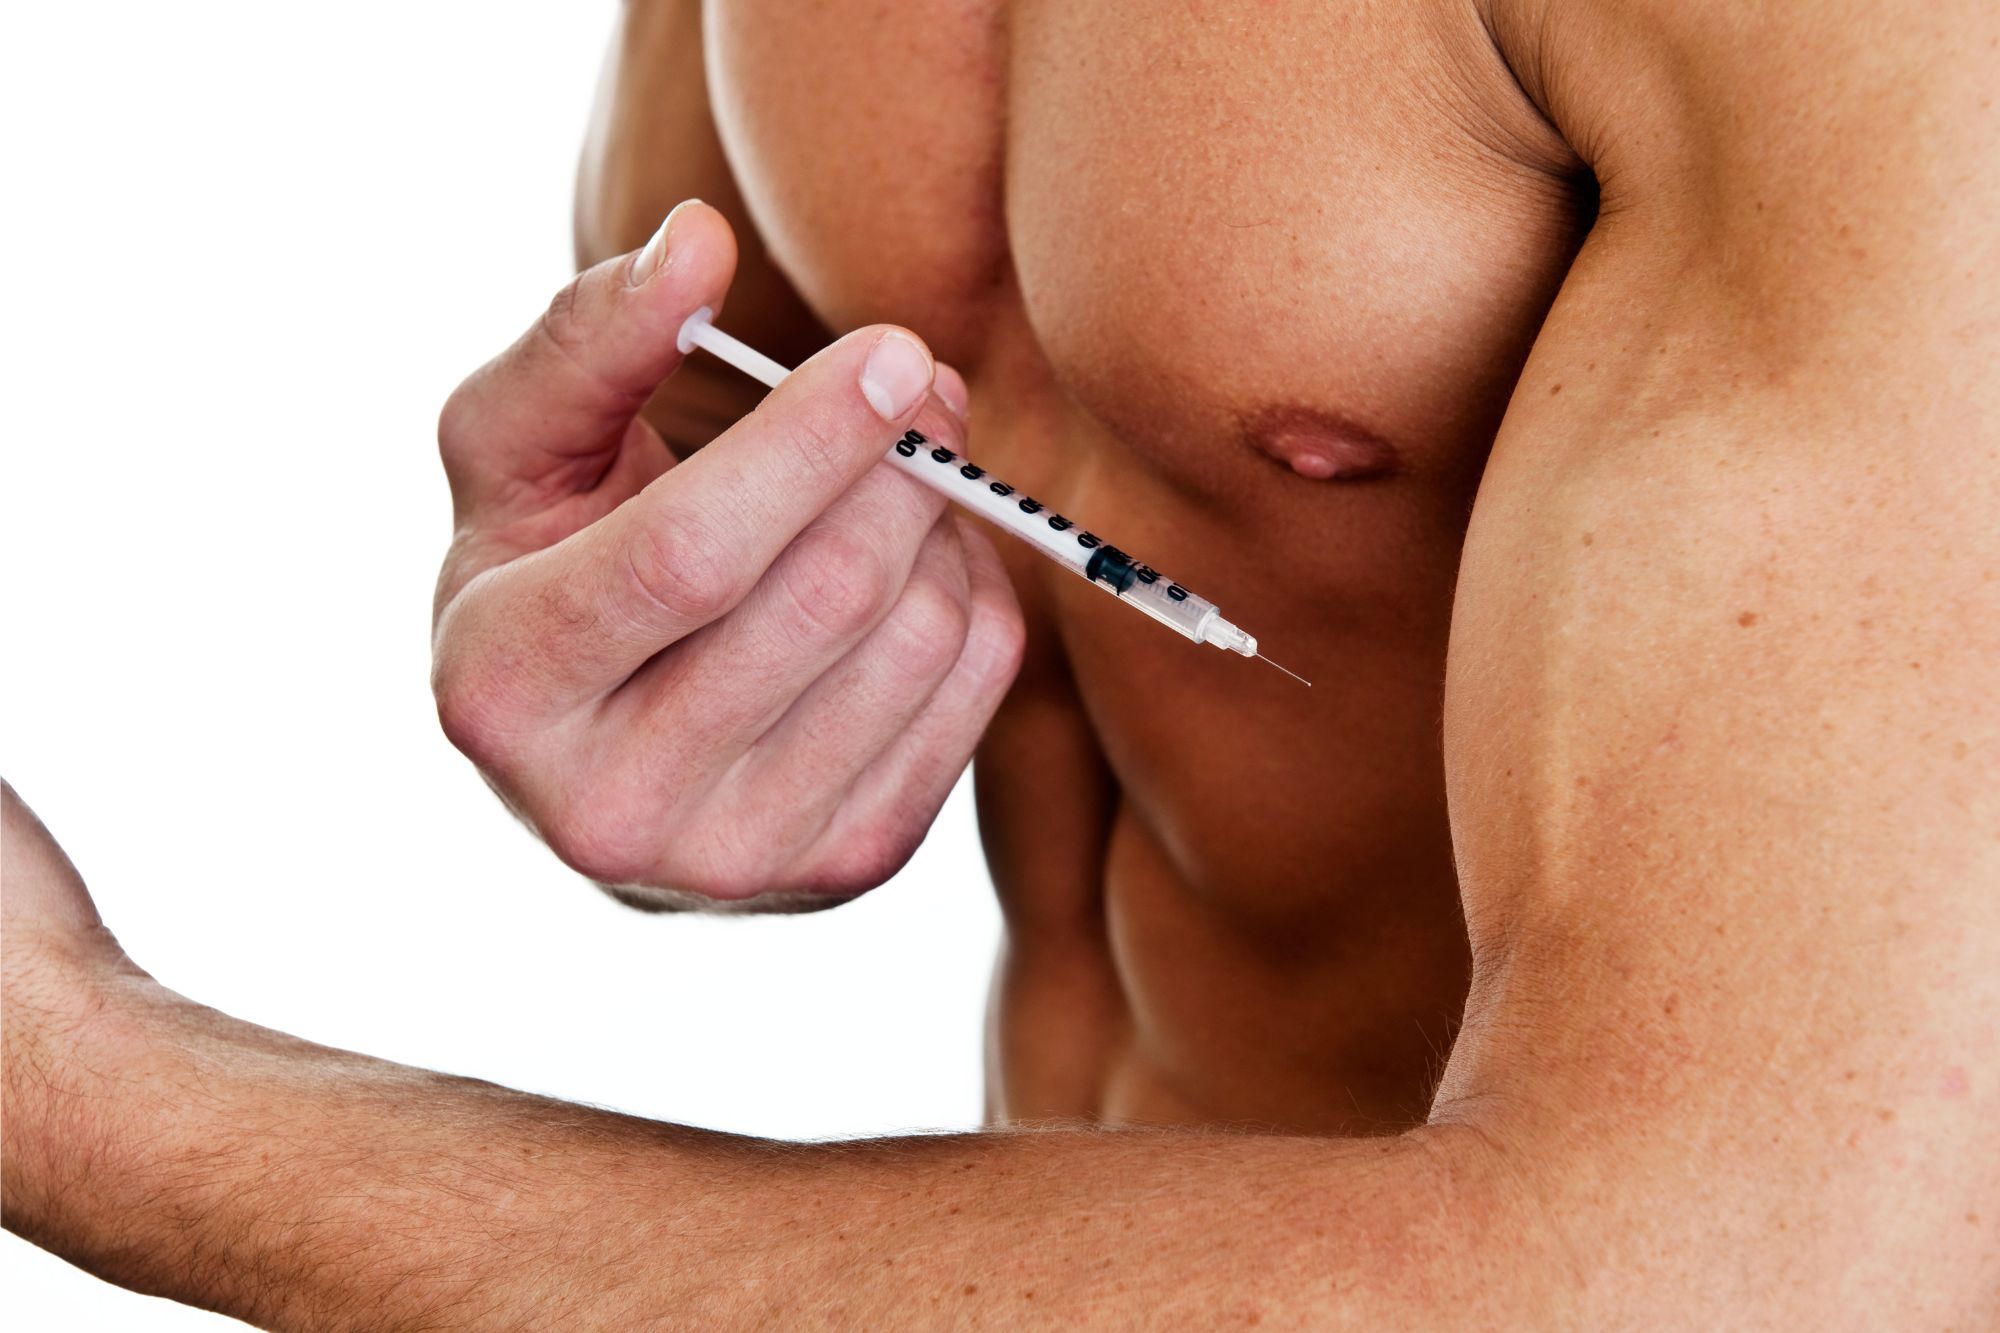 Scientists Discover Serious Side Effects Associated With Youth Steroid Use